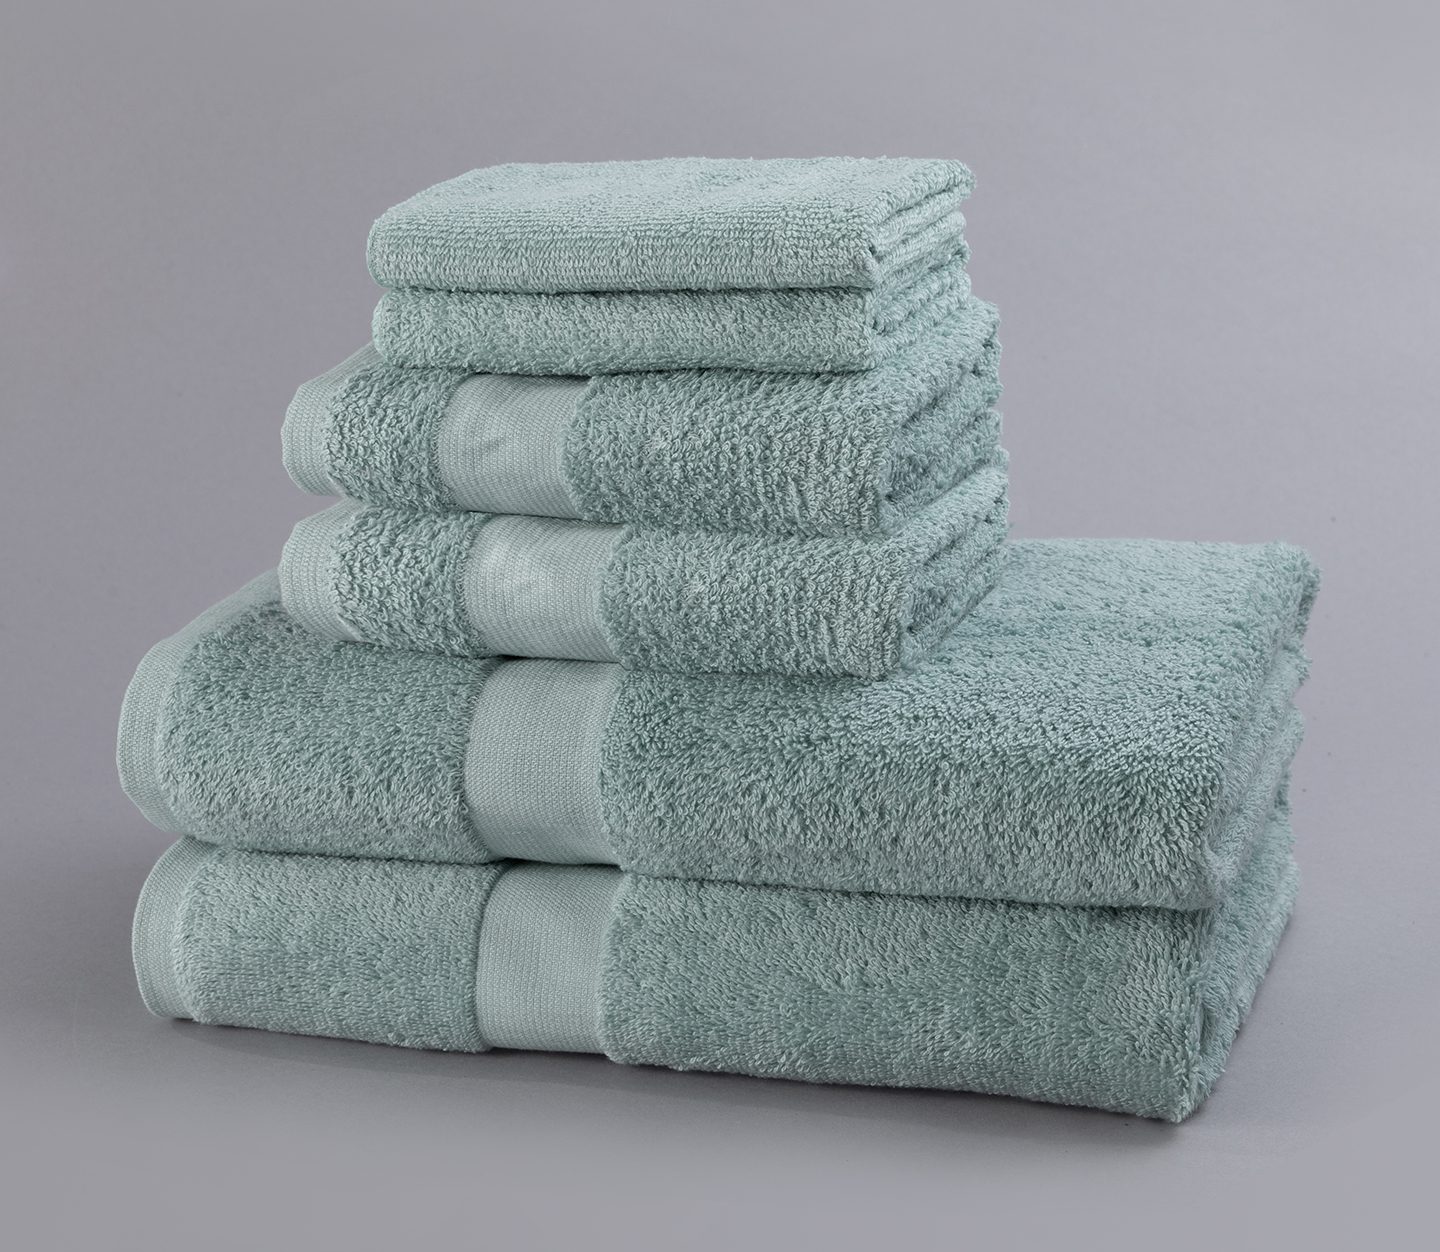 Vat-Dyed Healthcare Towels  Lasting Color and Softness